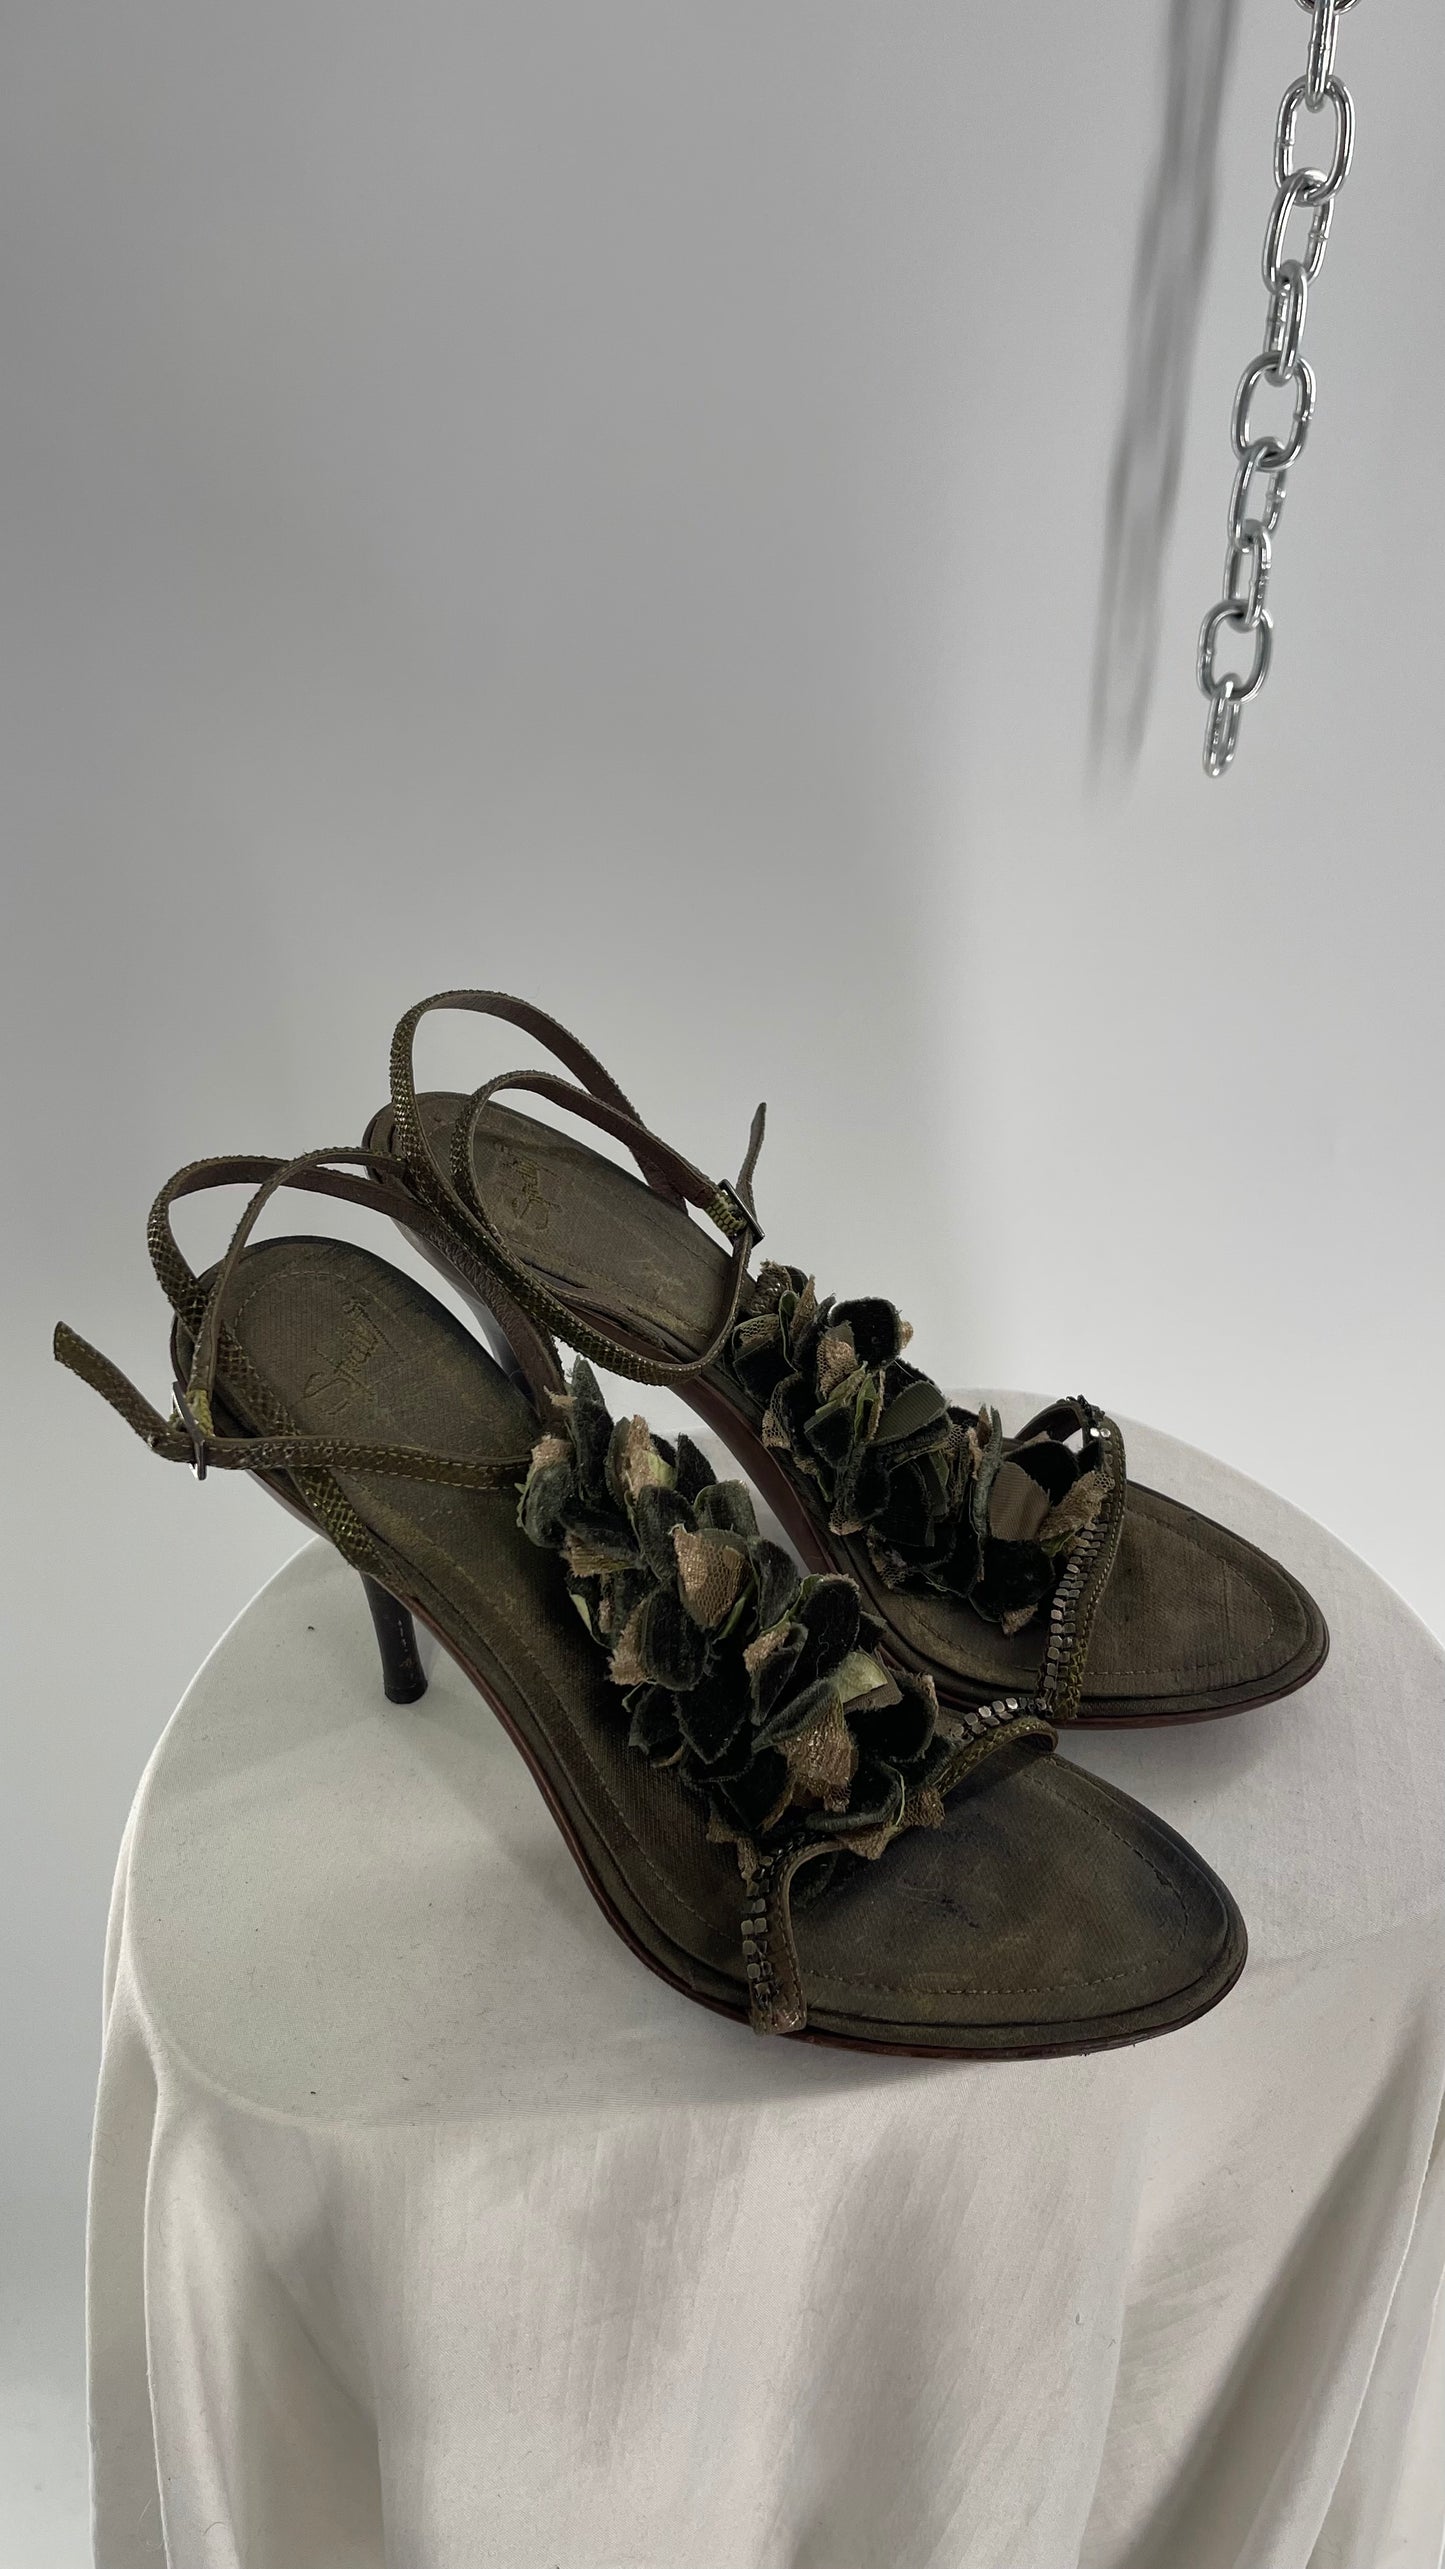 Vintage 1990s Italian Studio Designer Heel Forest Nymph, Mixed Texture Rosette Detailing with Leather Straps and Sole (8.5)